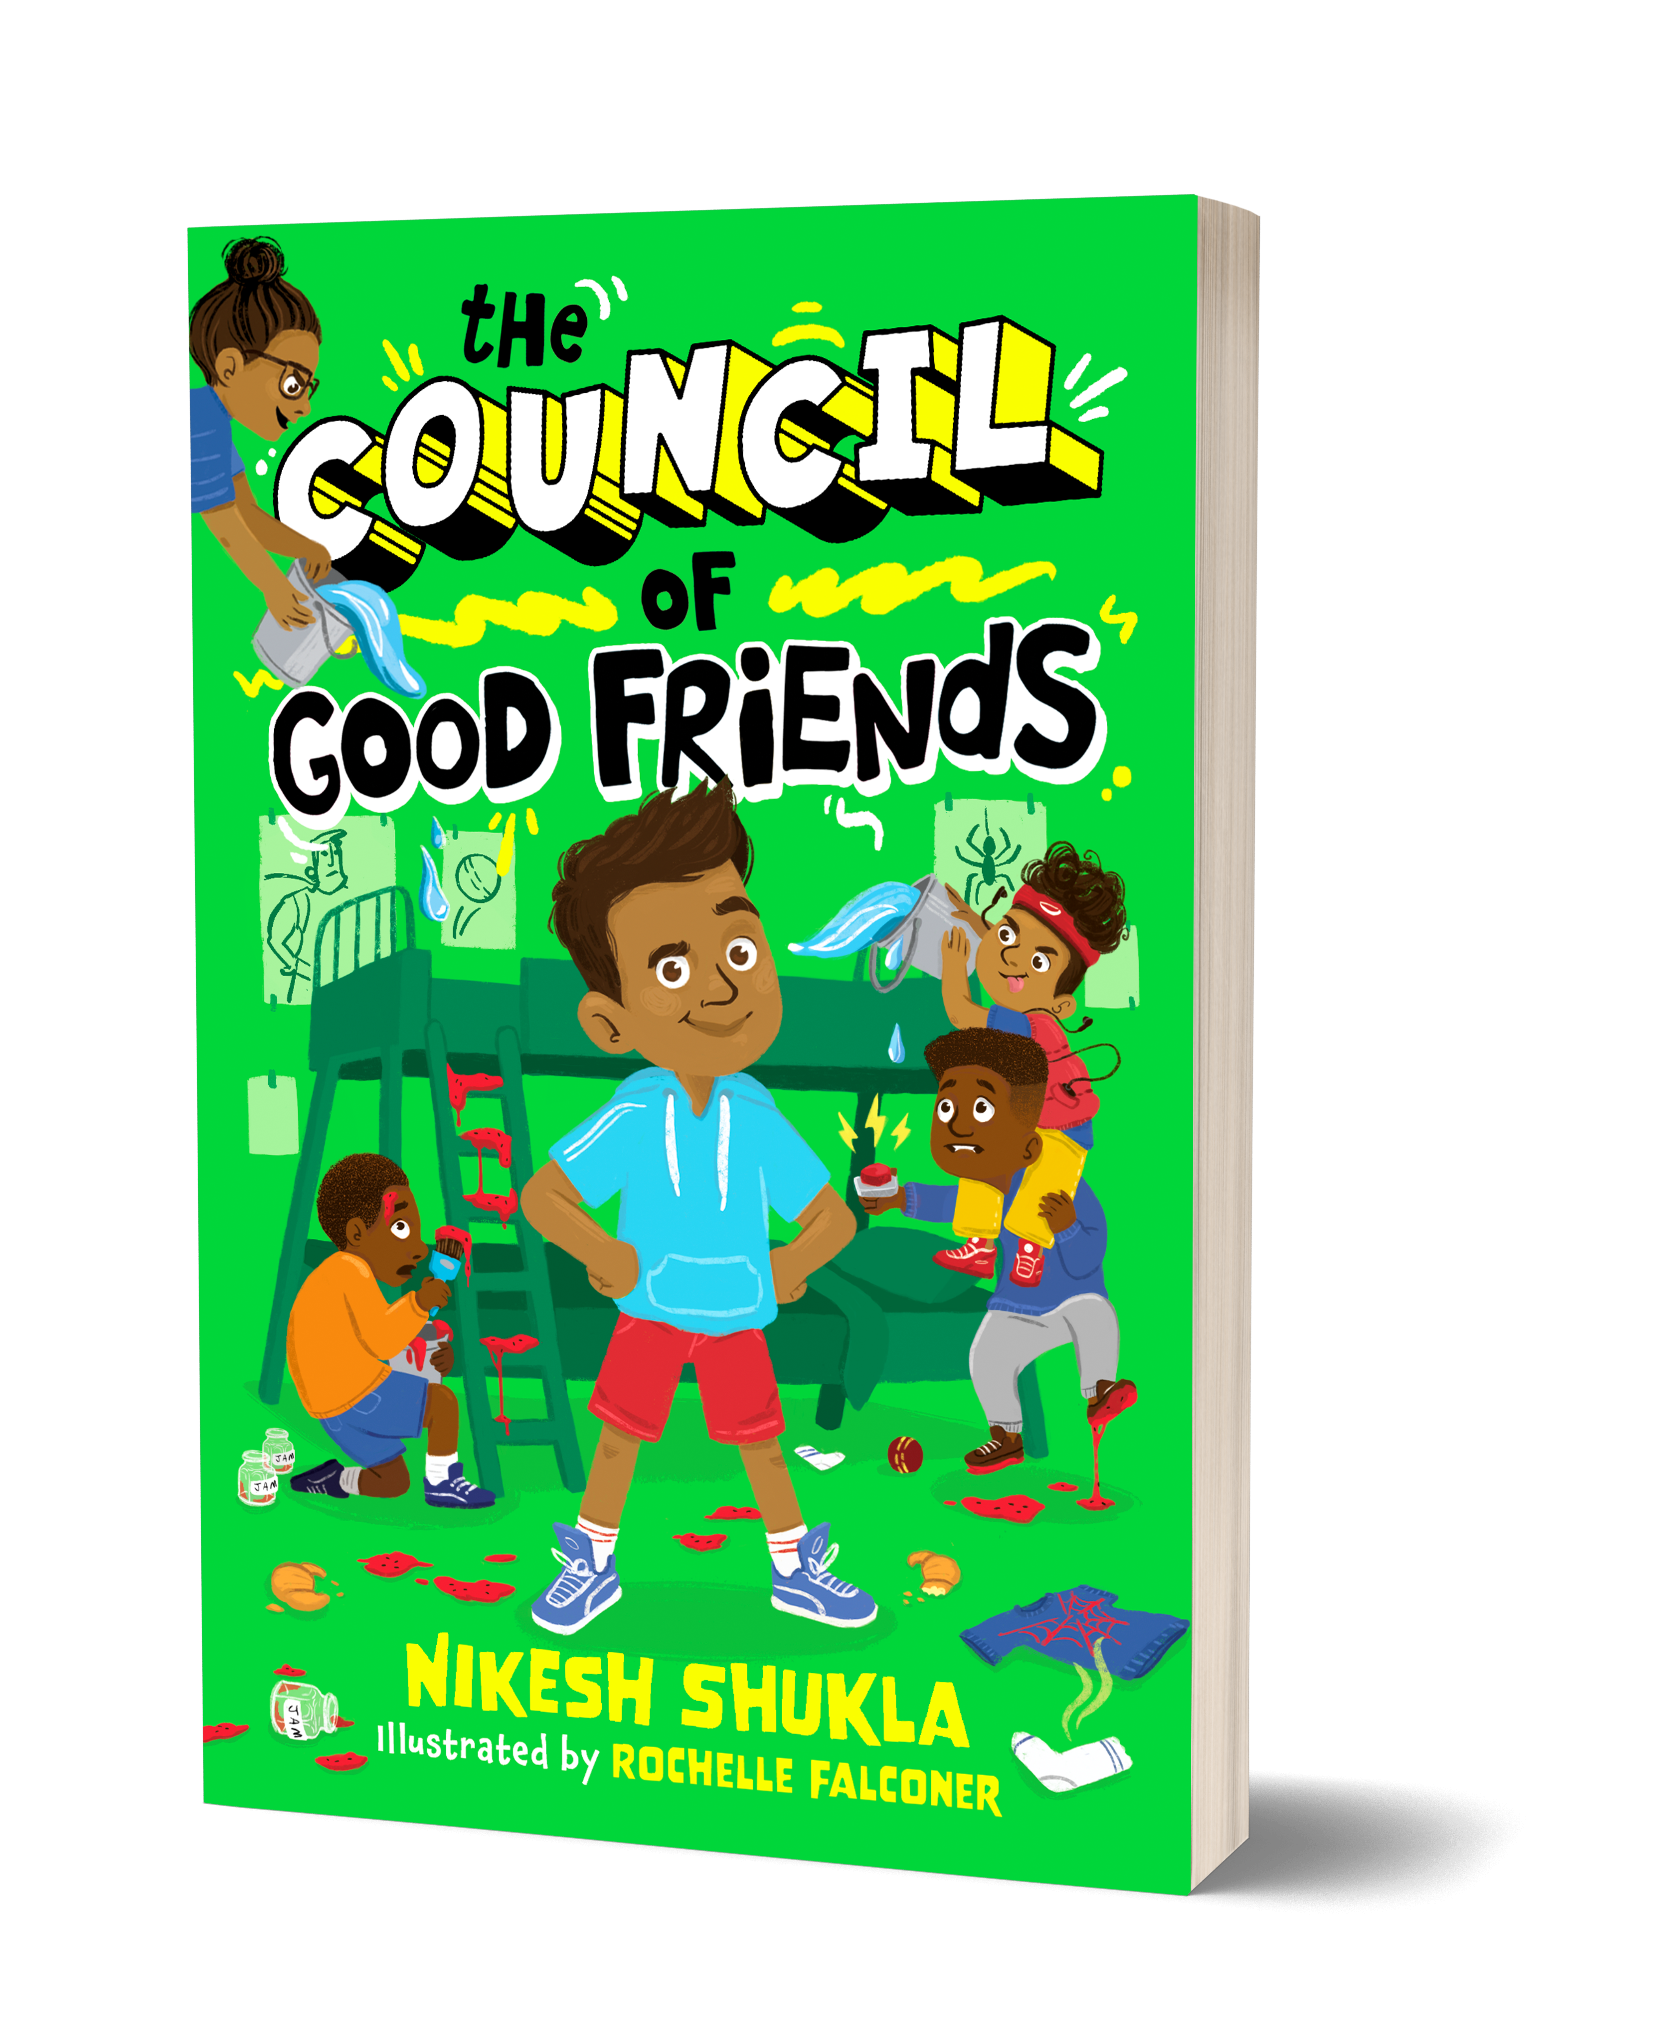 The Council of Good Friends